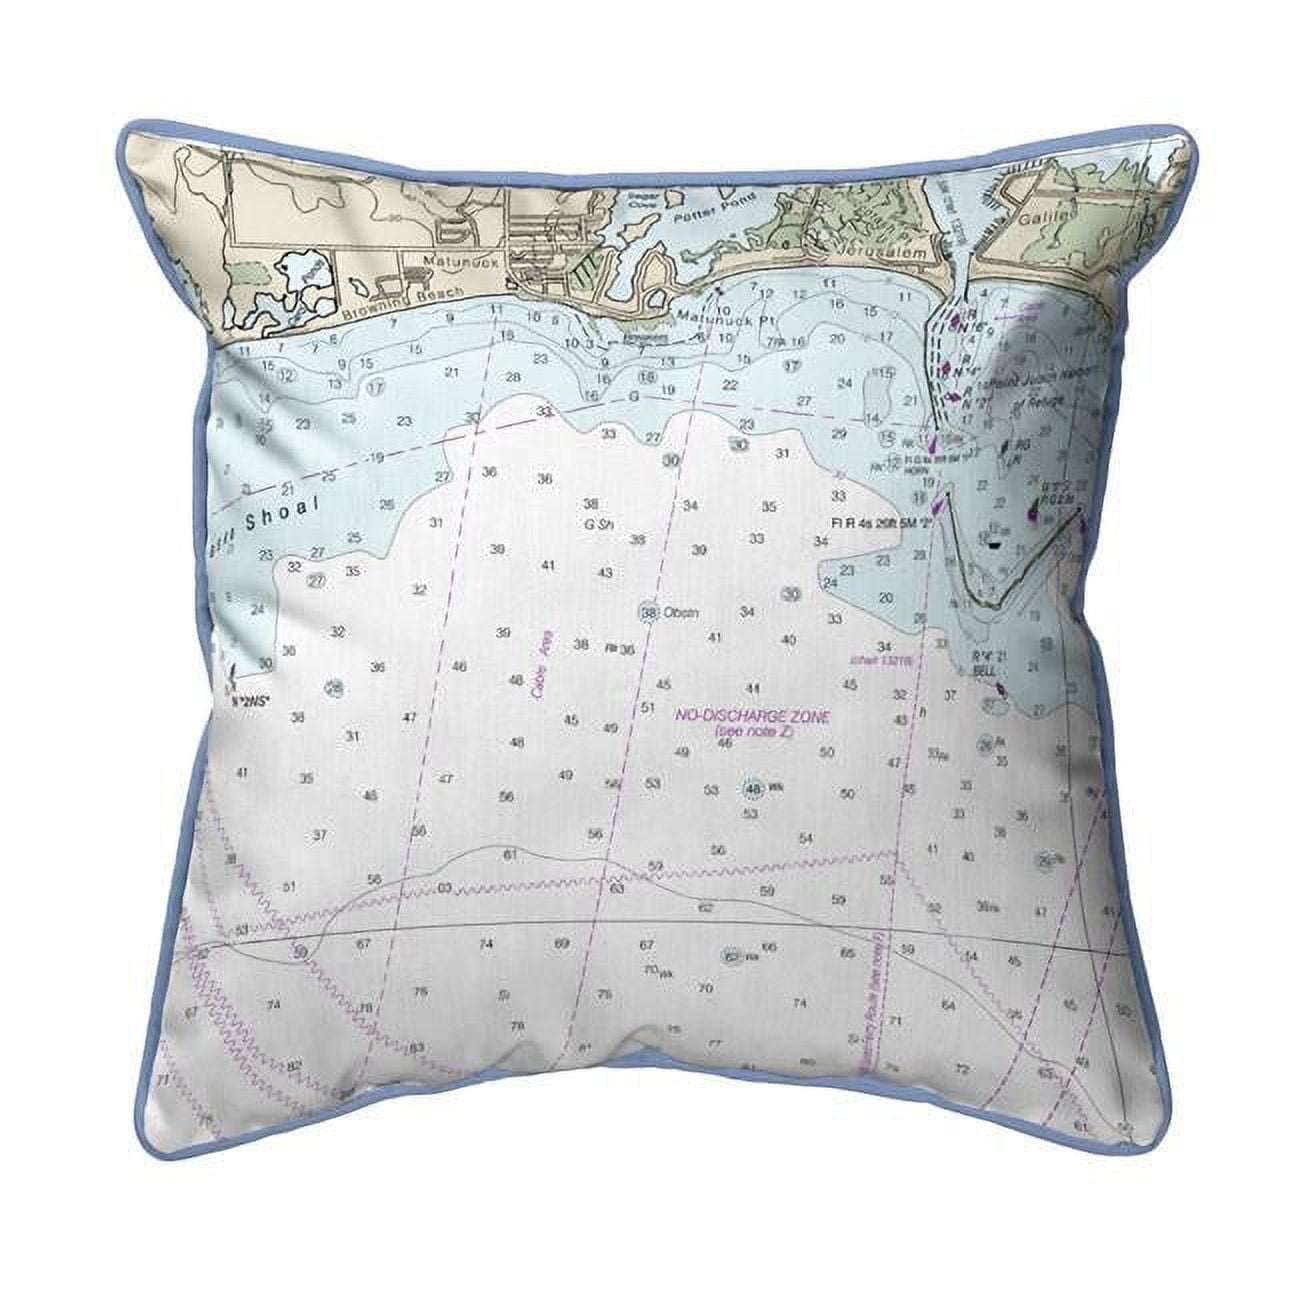 JensenDistributionServices 22 x 22 in. Block Island Sound - Matunuck&#44; RI Nautical Map Extra Large Zippered Indoor & Outdoor Pillow